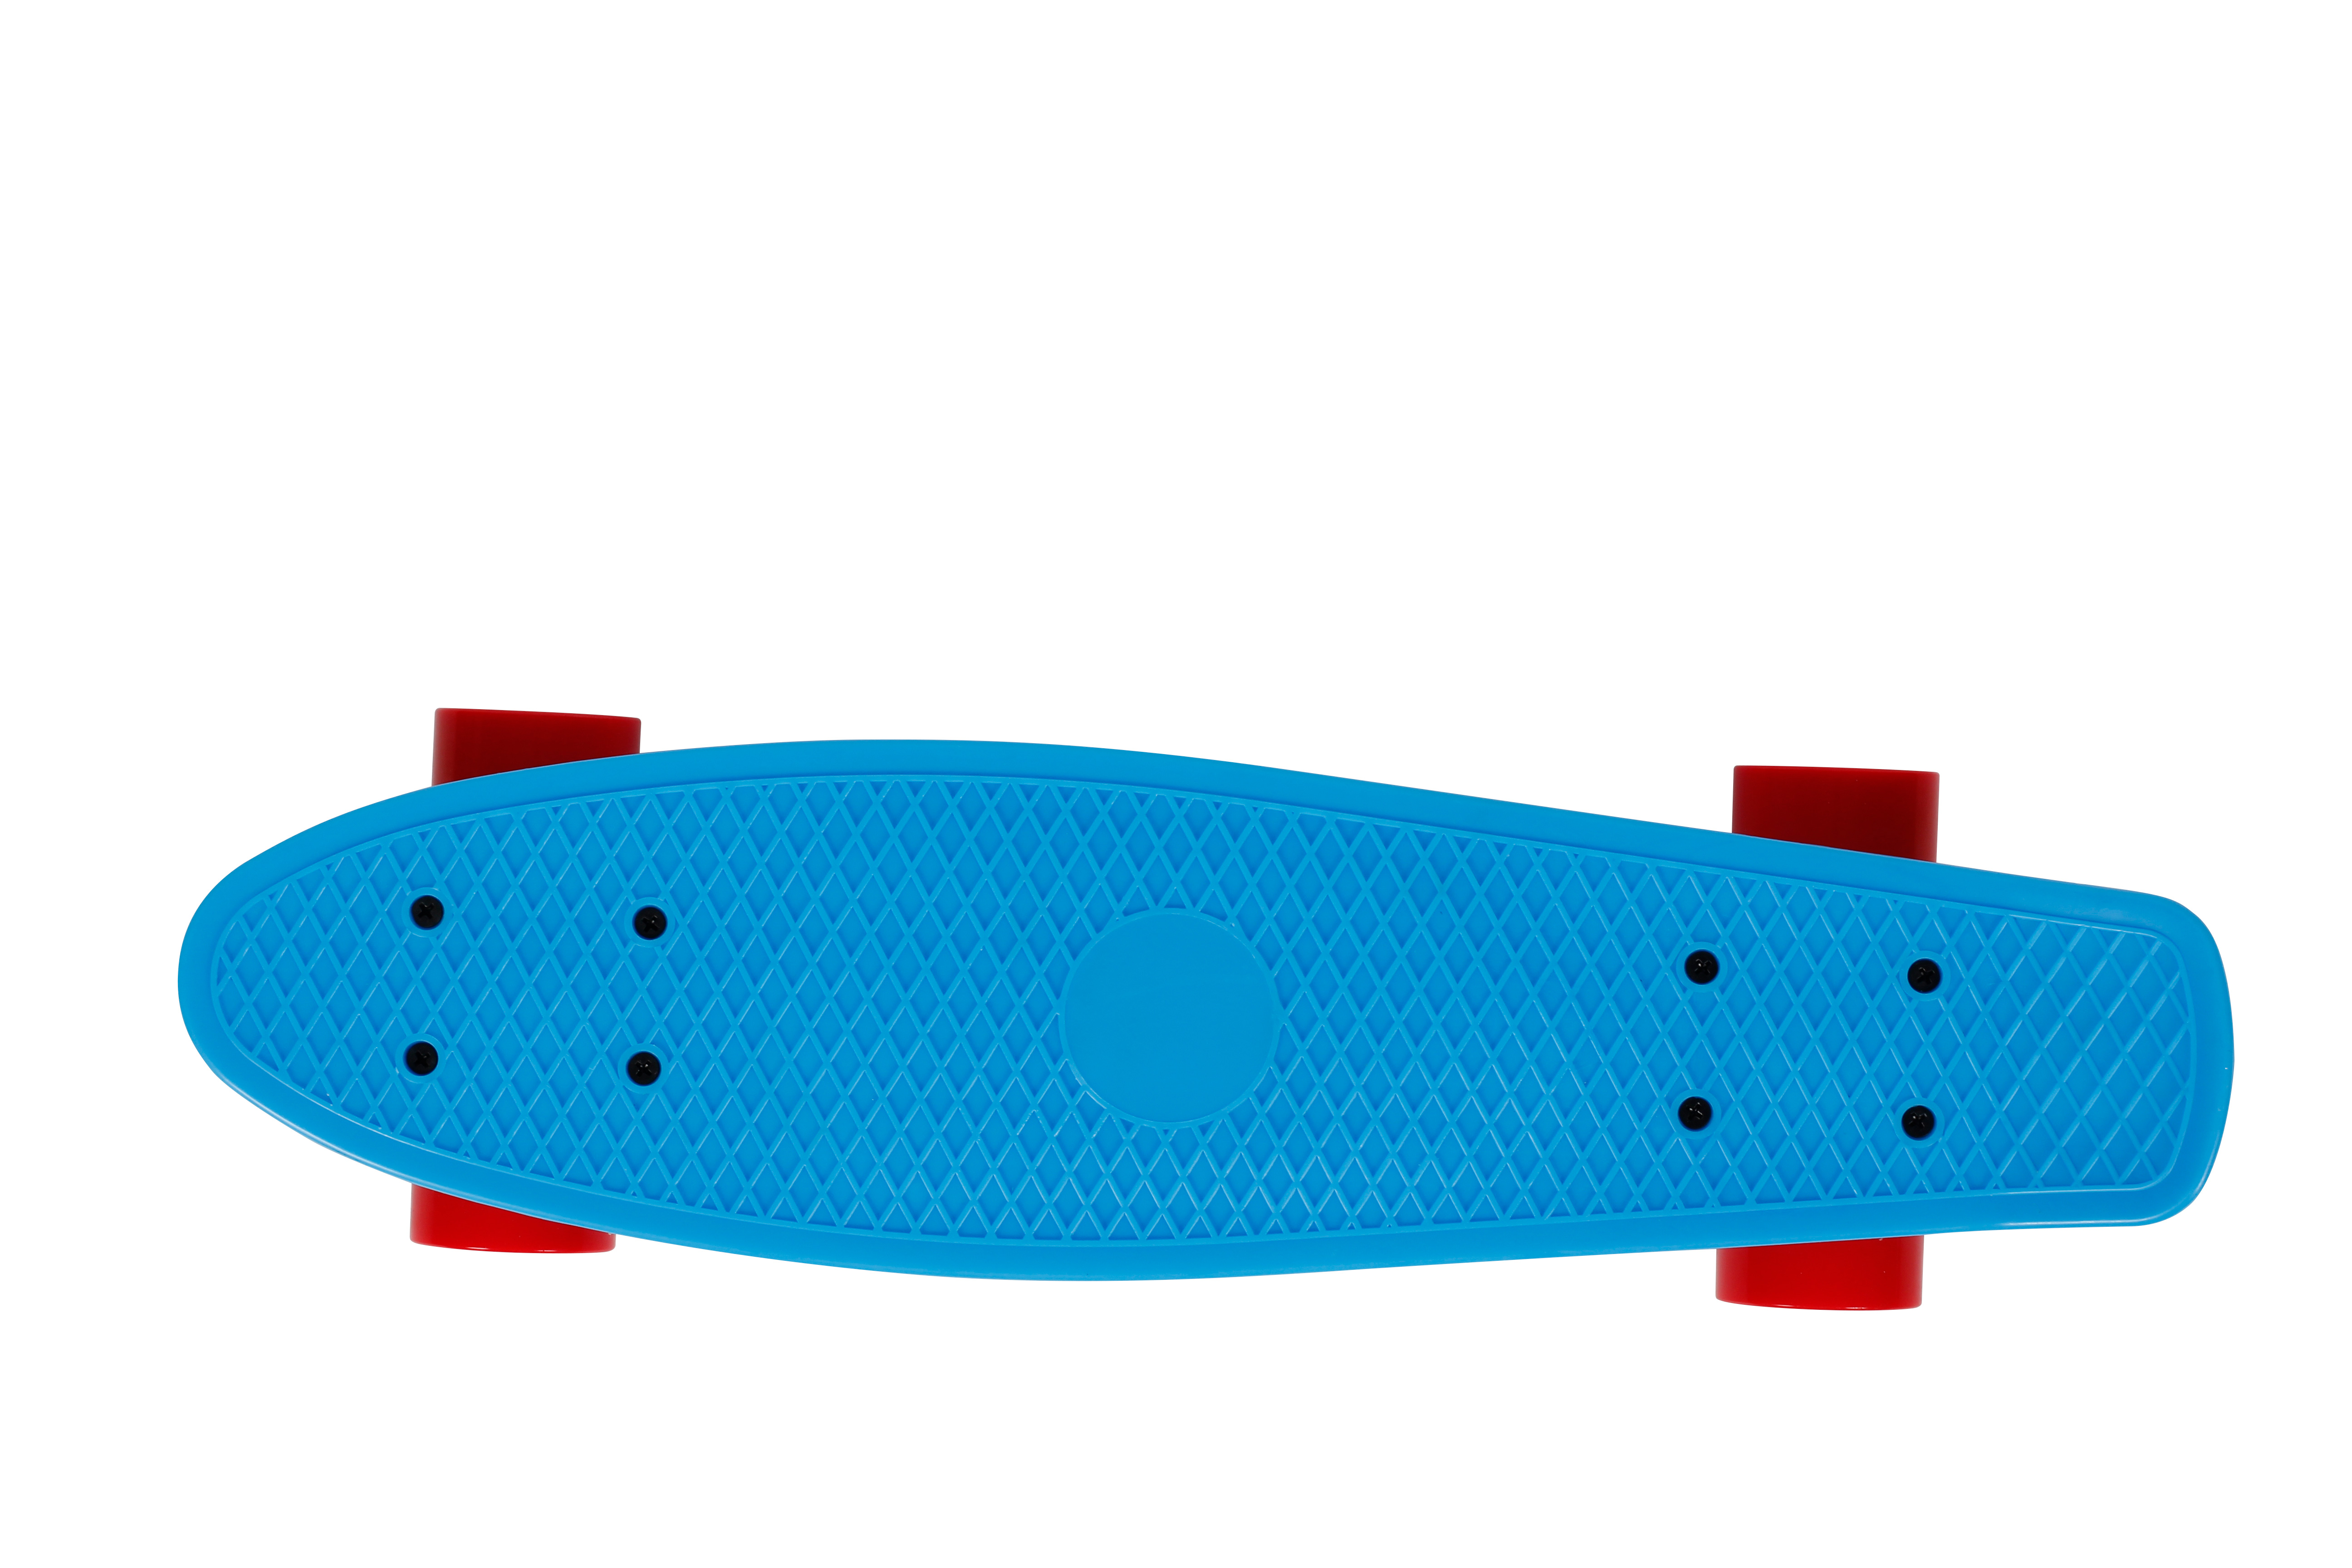 Complete 22 Inch Classic Mini Cruiser Skateboard for Beginner with Sturdy Deck 